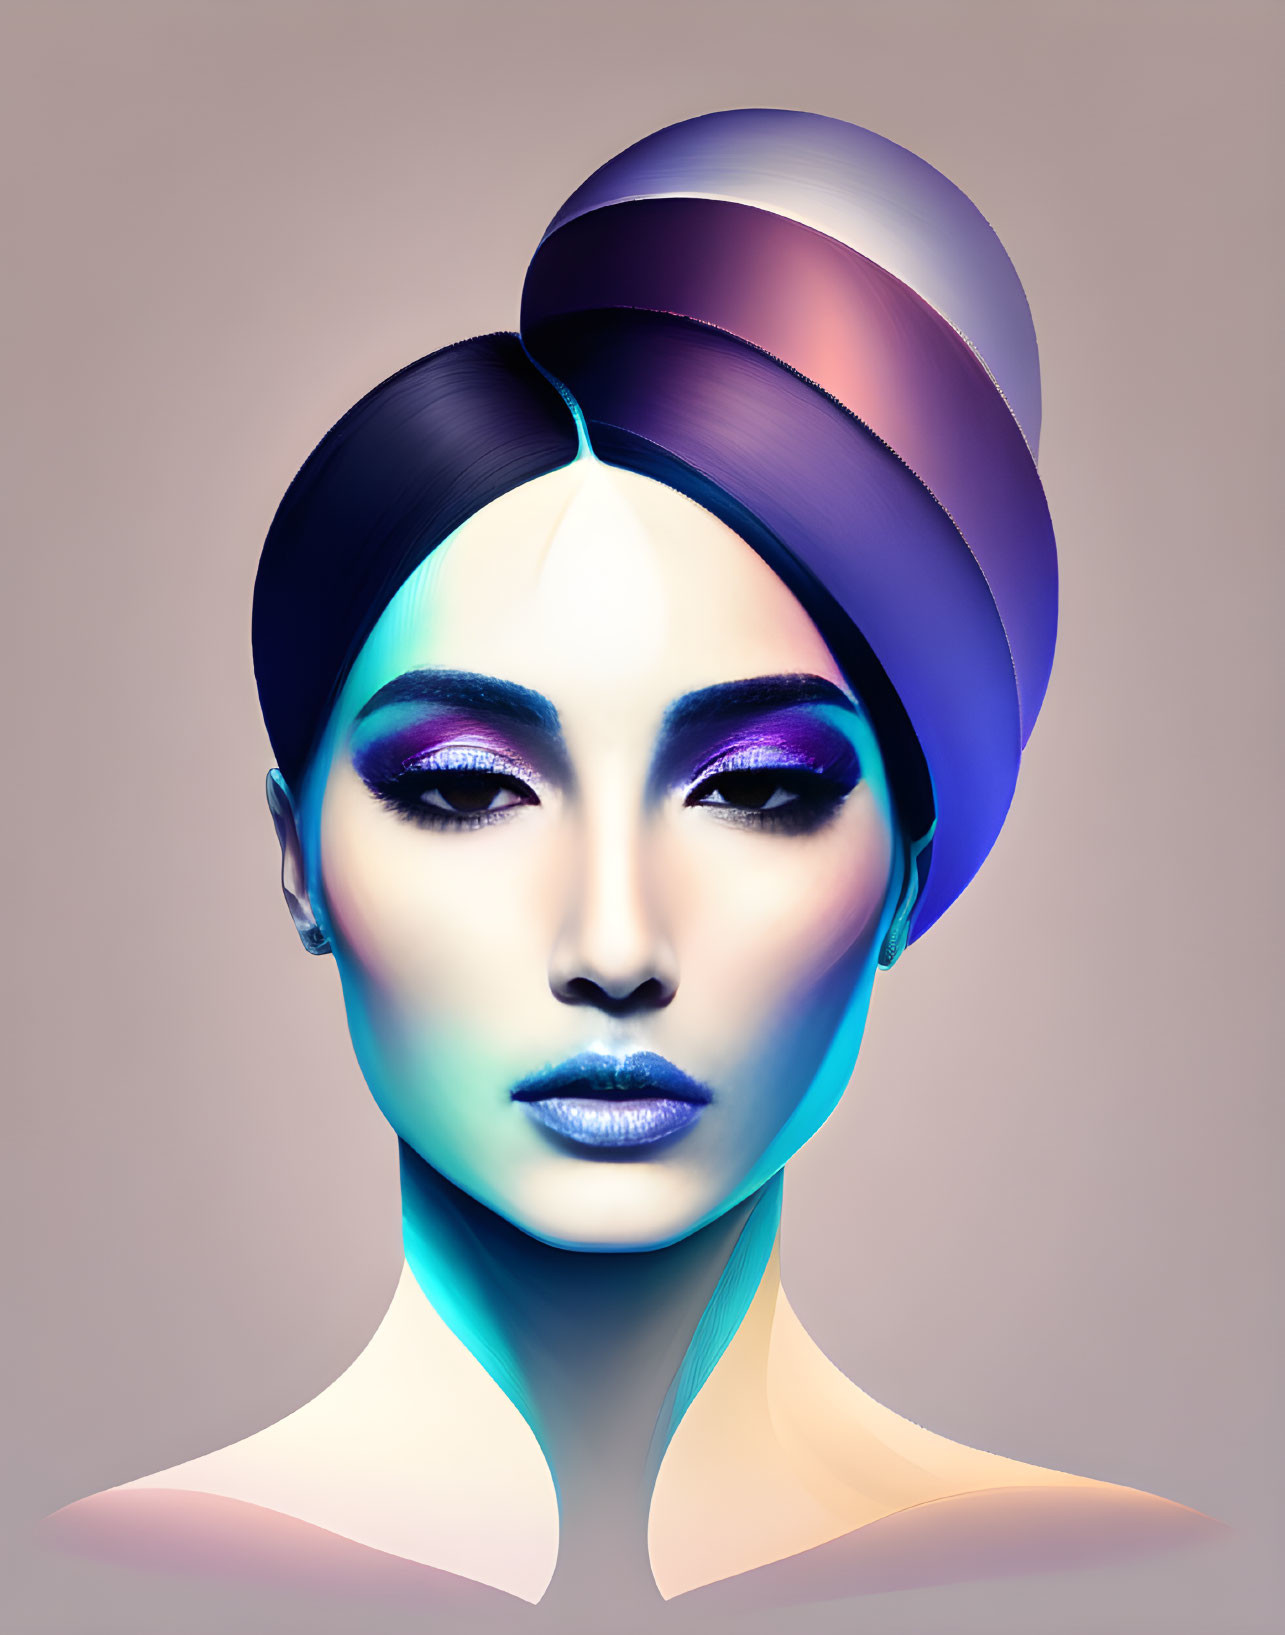 Colorful Gradient Makeup and Stylized Hairstyle Illustration